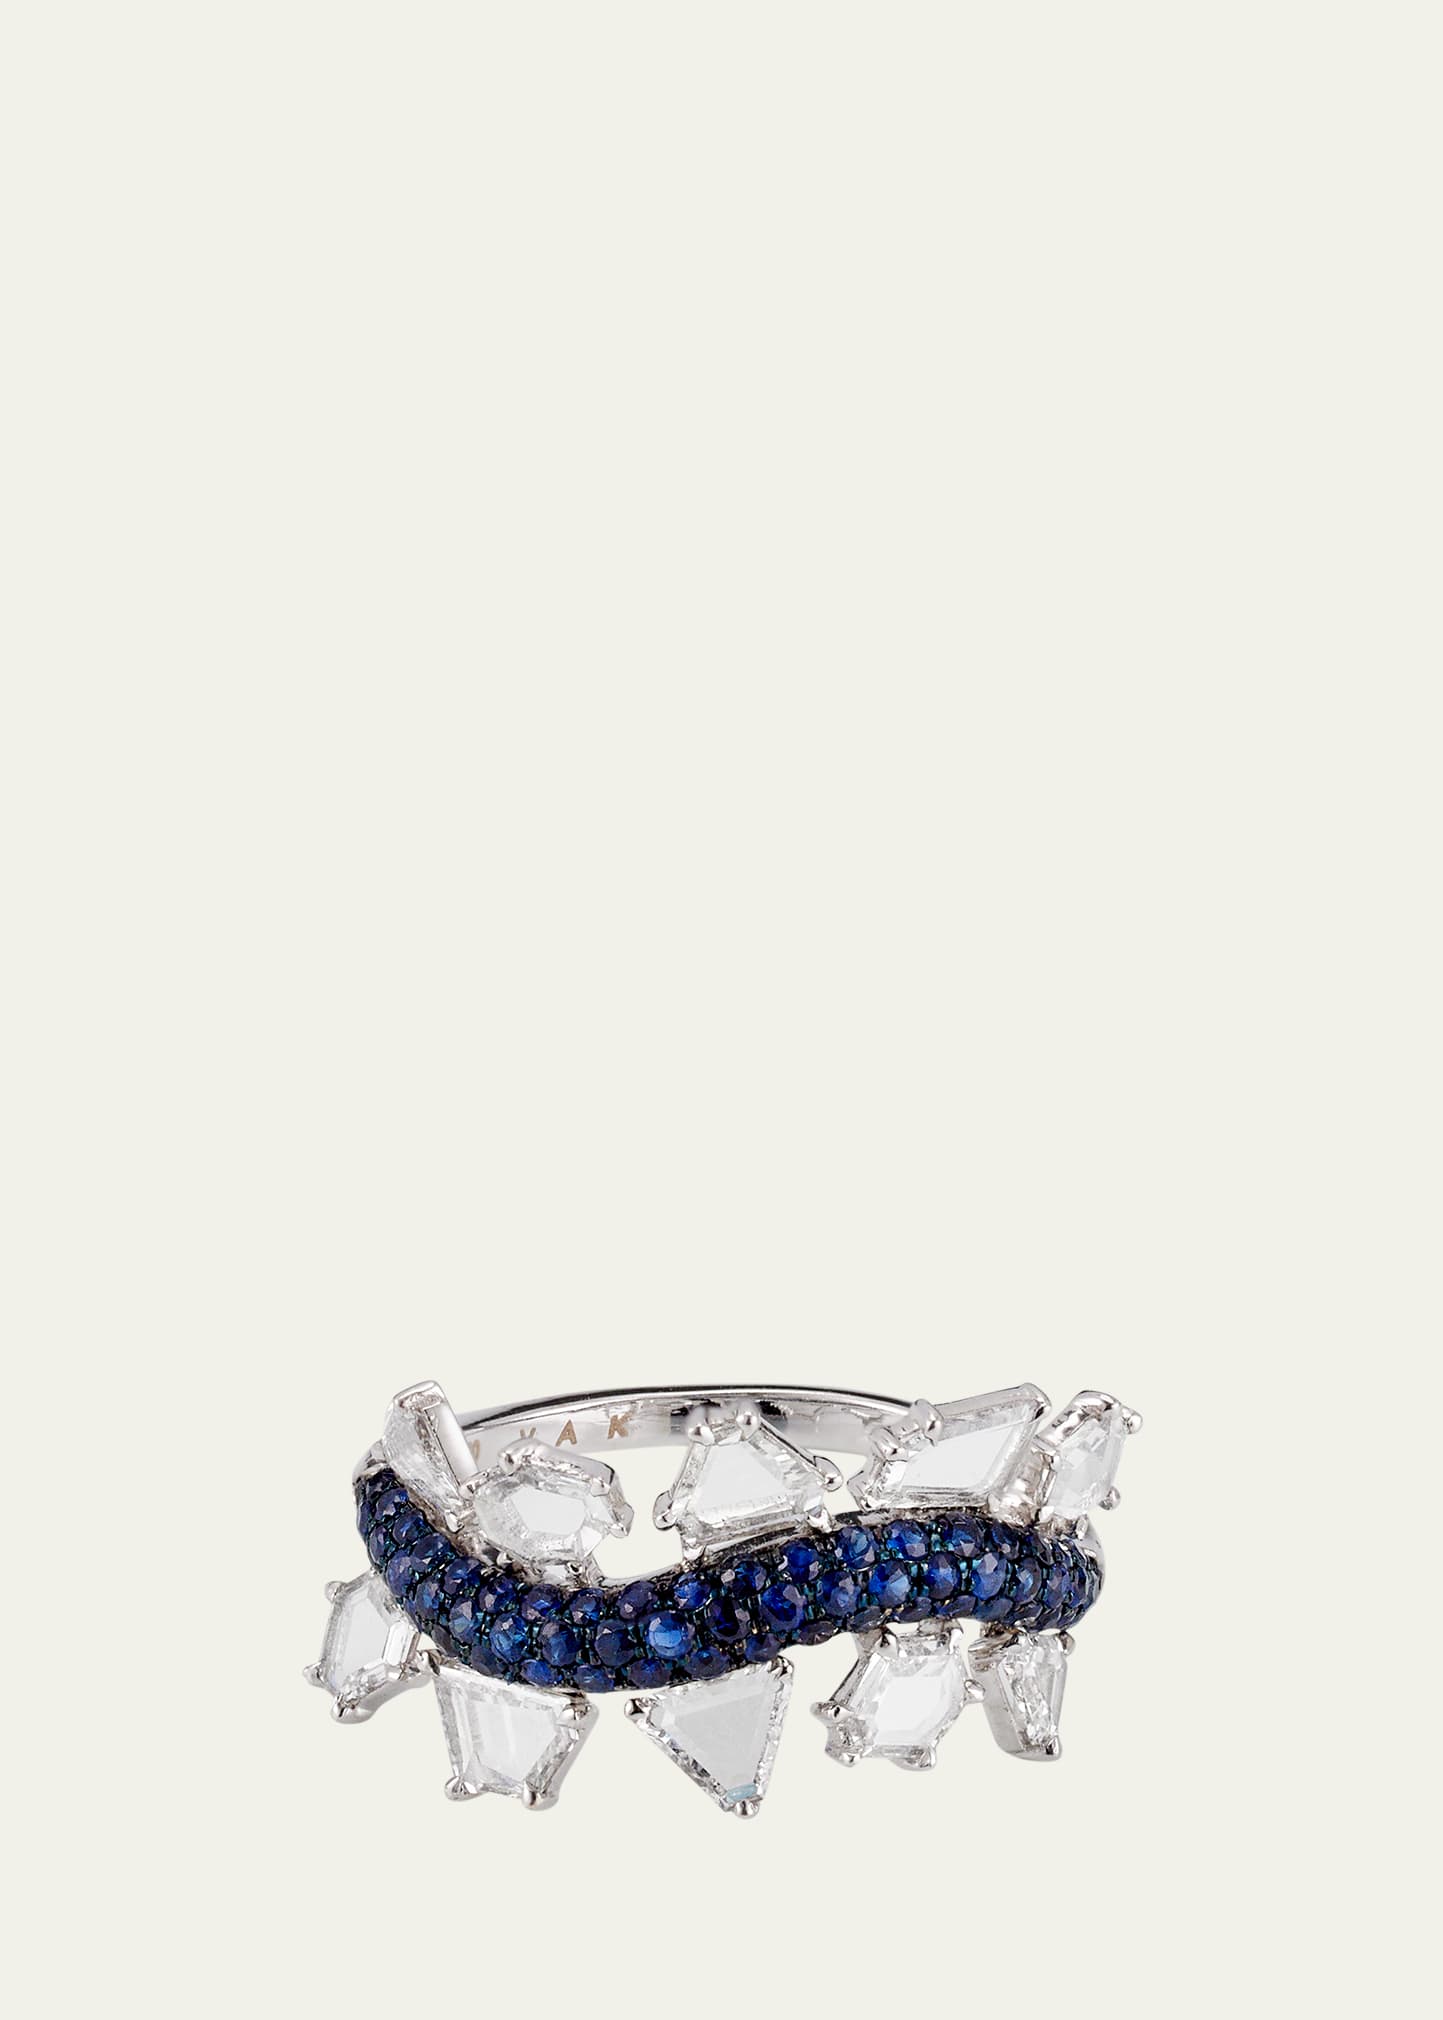 The Portrait Diamond and Natural Sapphire Ring